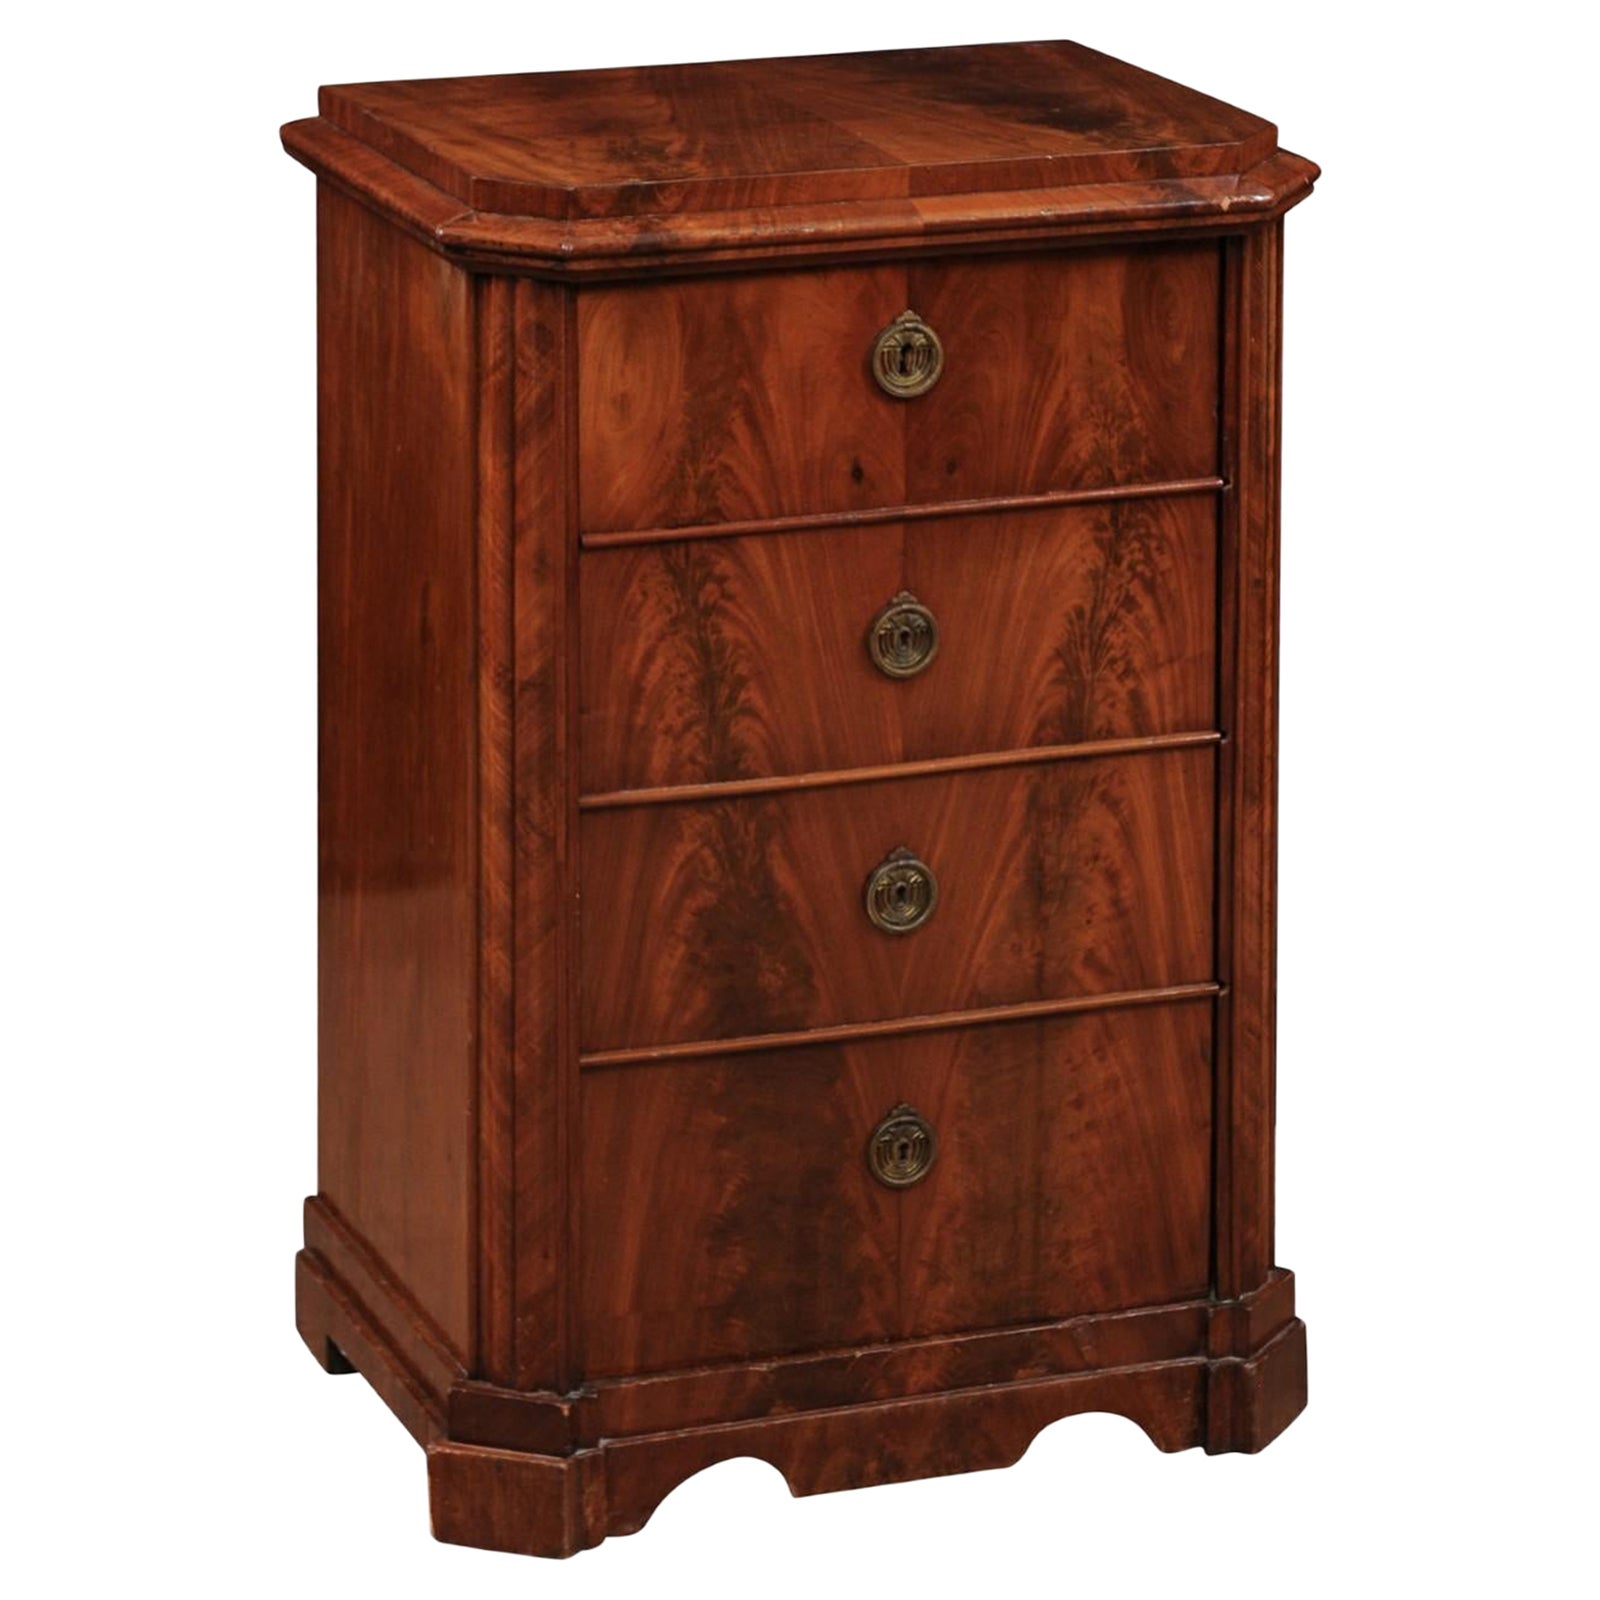 19th Century Biedermeier Walnut Side Cabinet with Canted Corners & Faux Drawers For Sale